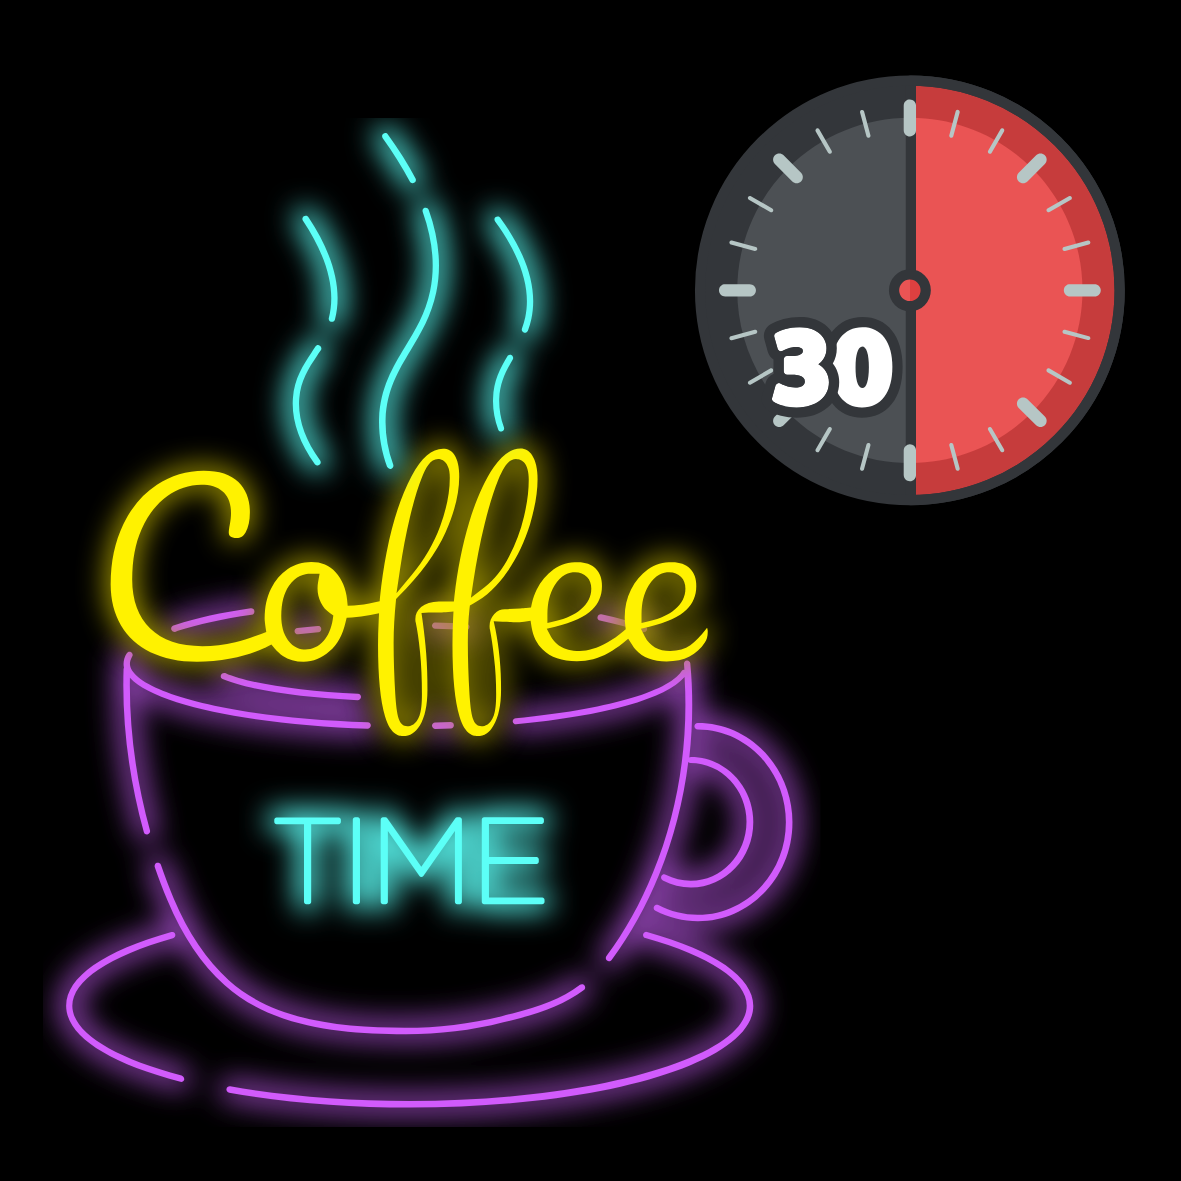 Coffee has a peak effect on the body in around 30 minutes